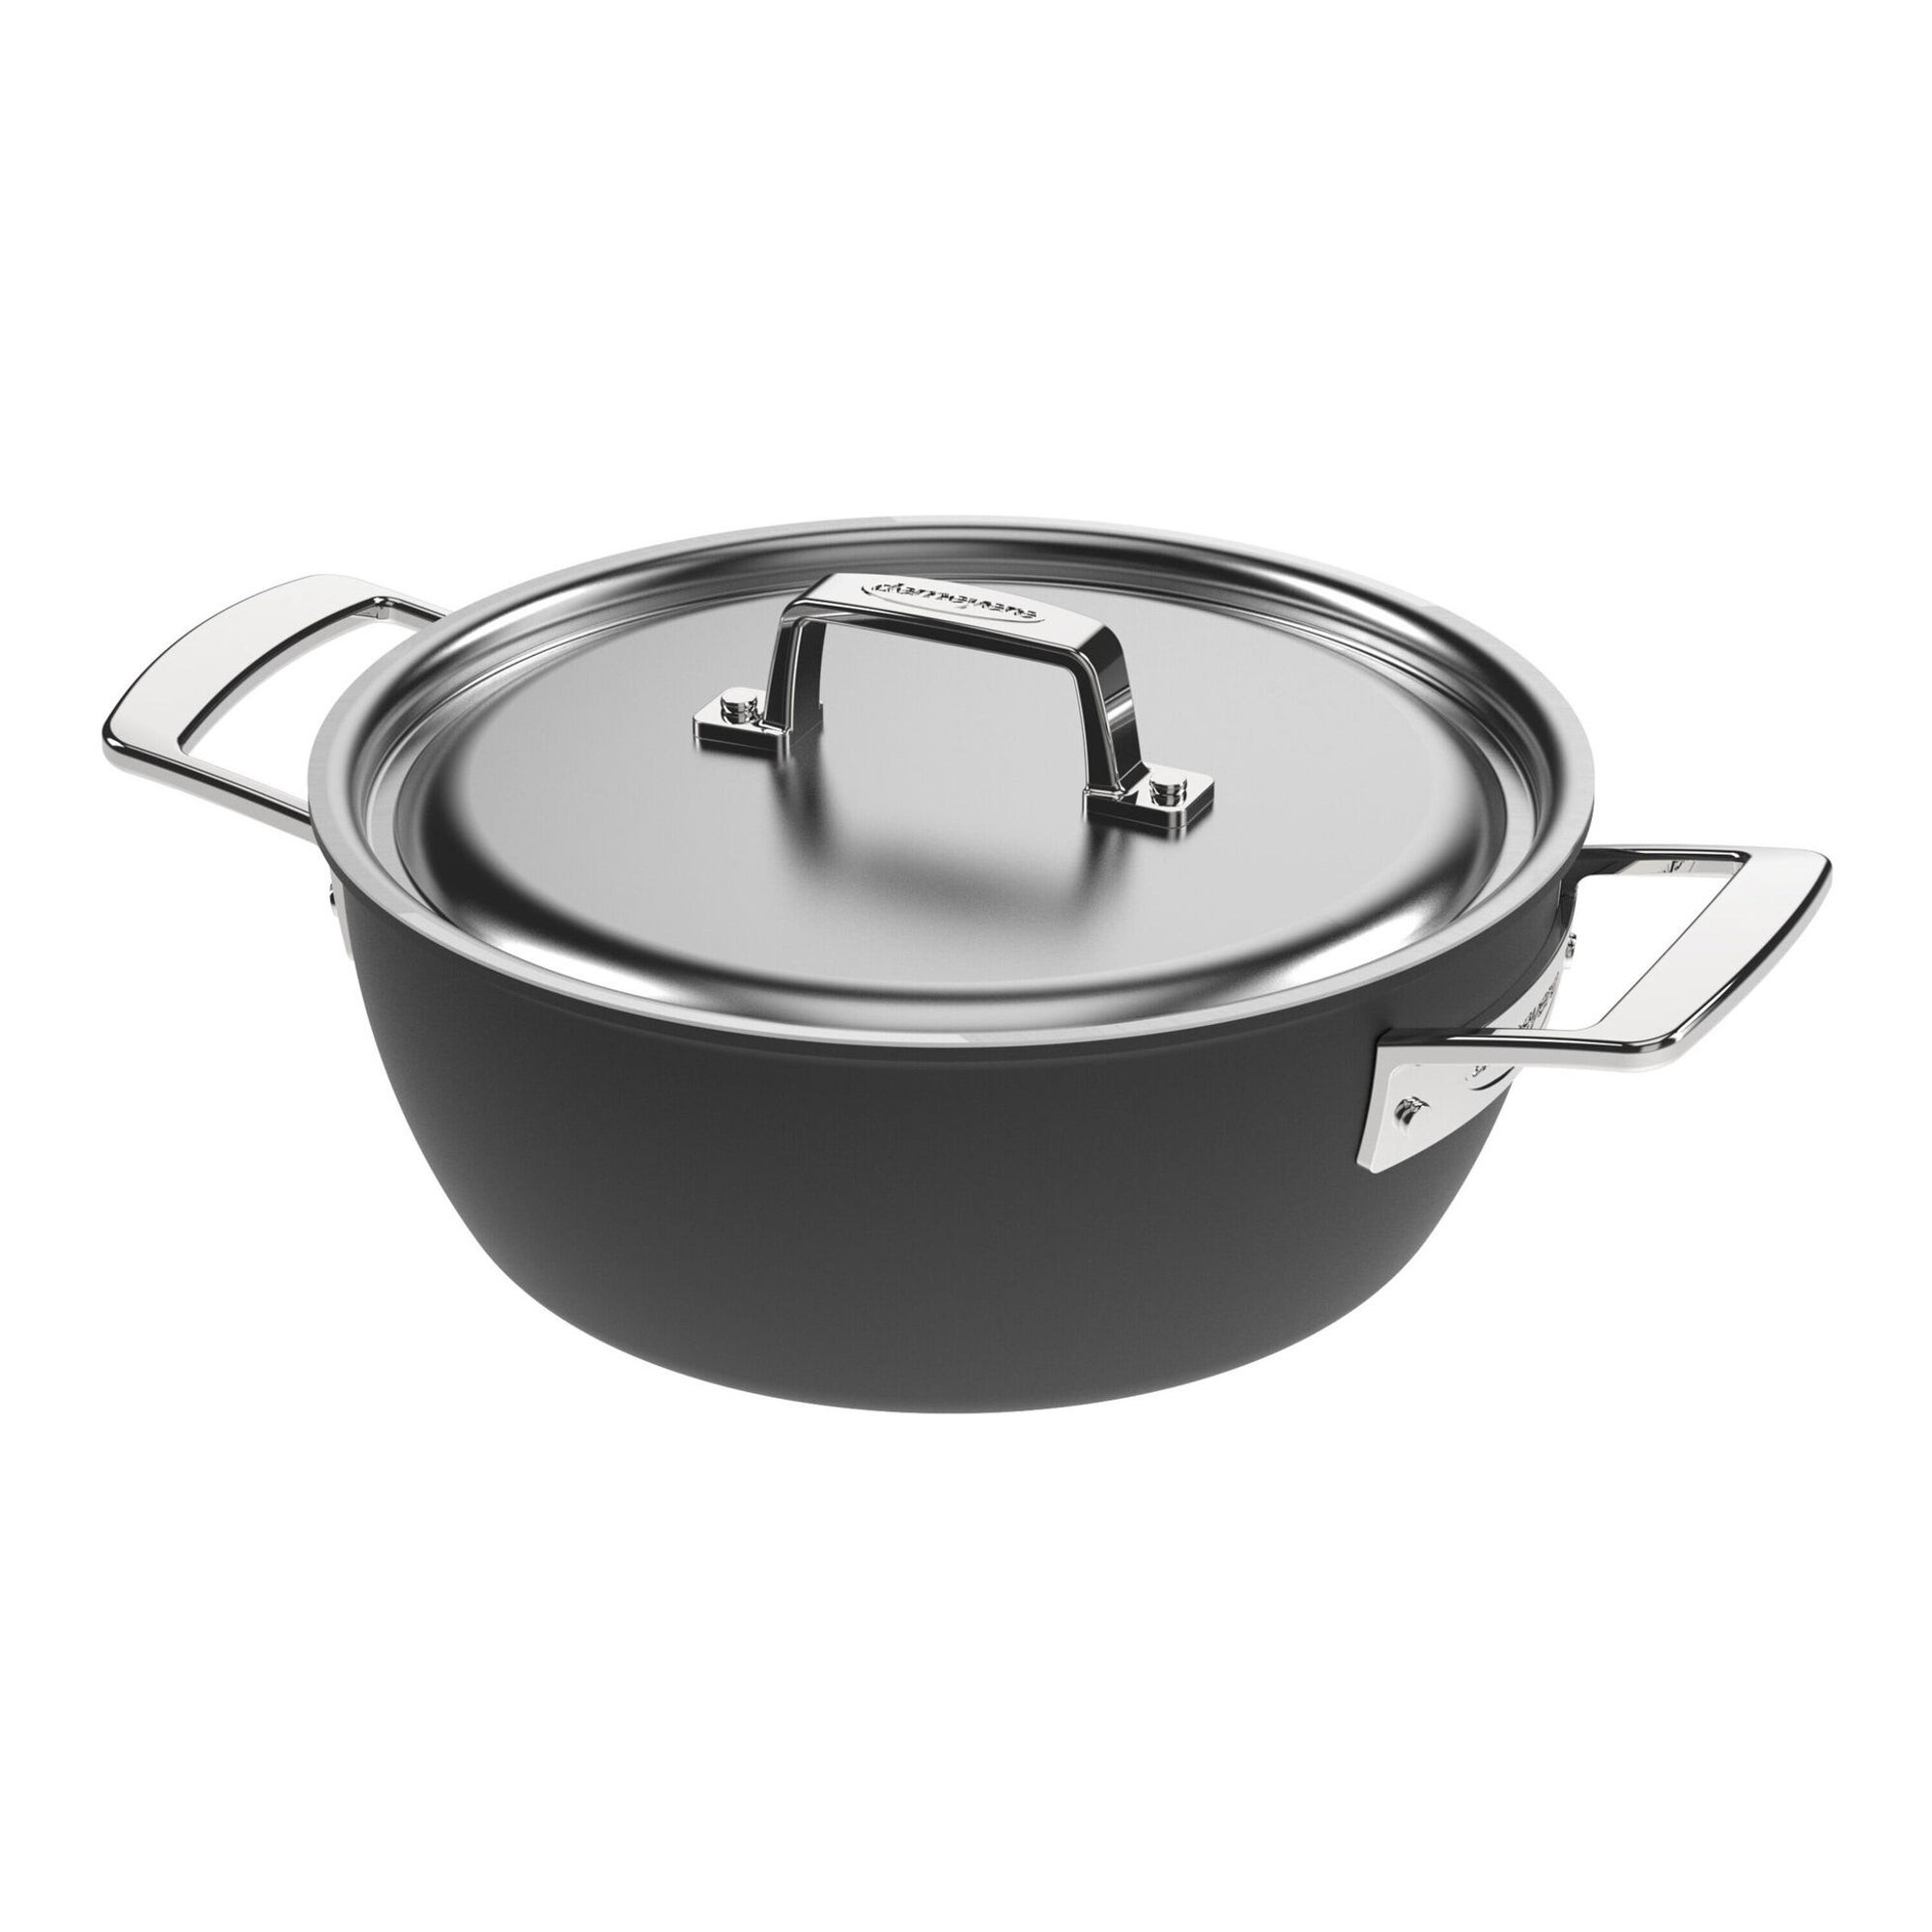 Black 5-Ply 3.5qt Stainless Steel Dutch Oven w/ Ceramic Exterior